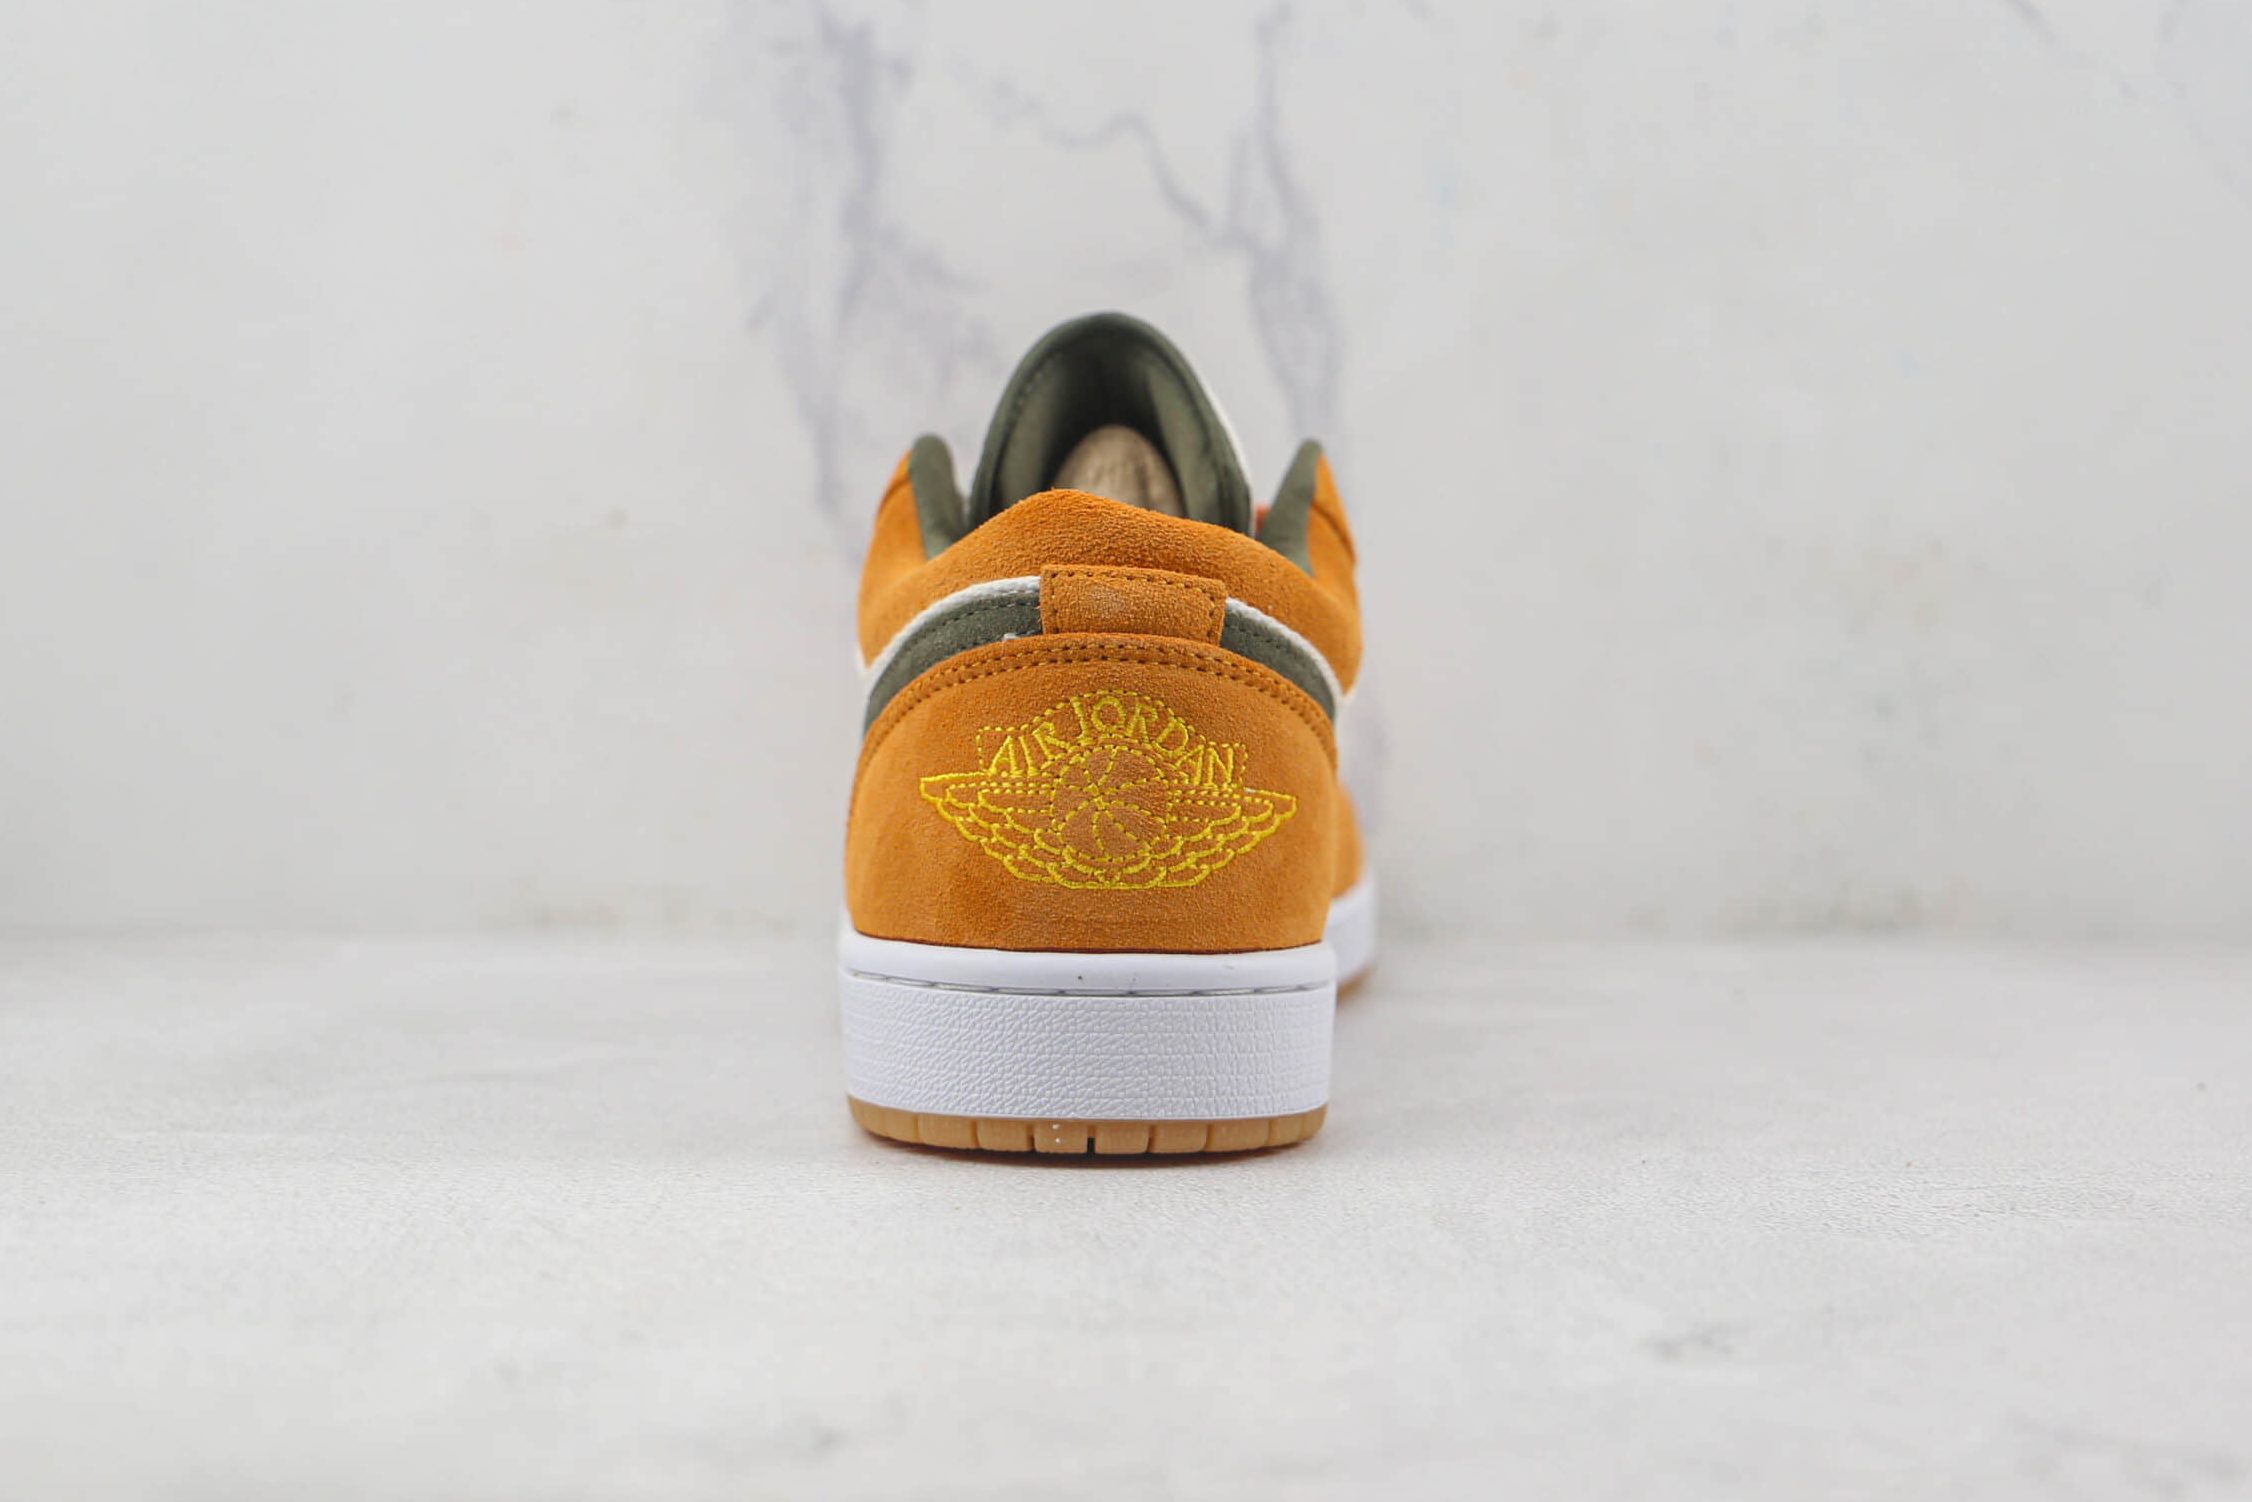 Air Jordan 1 Low SE 'Light Curry' DH6931-102 - Stylish Low-Top Sneakers